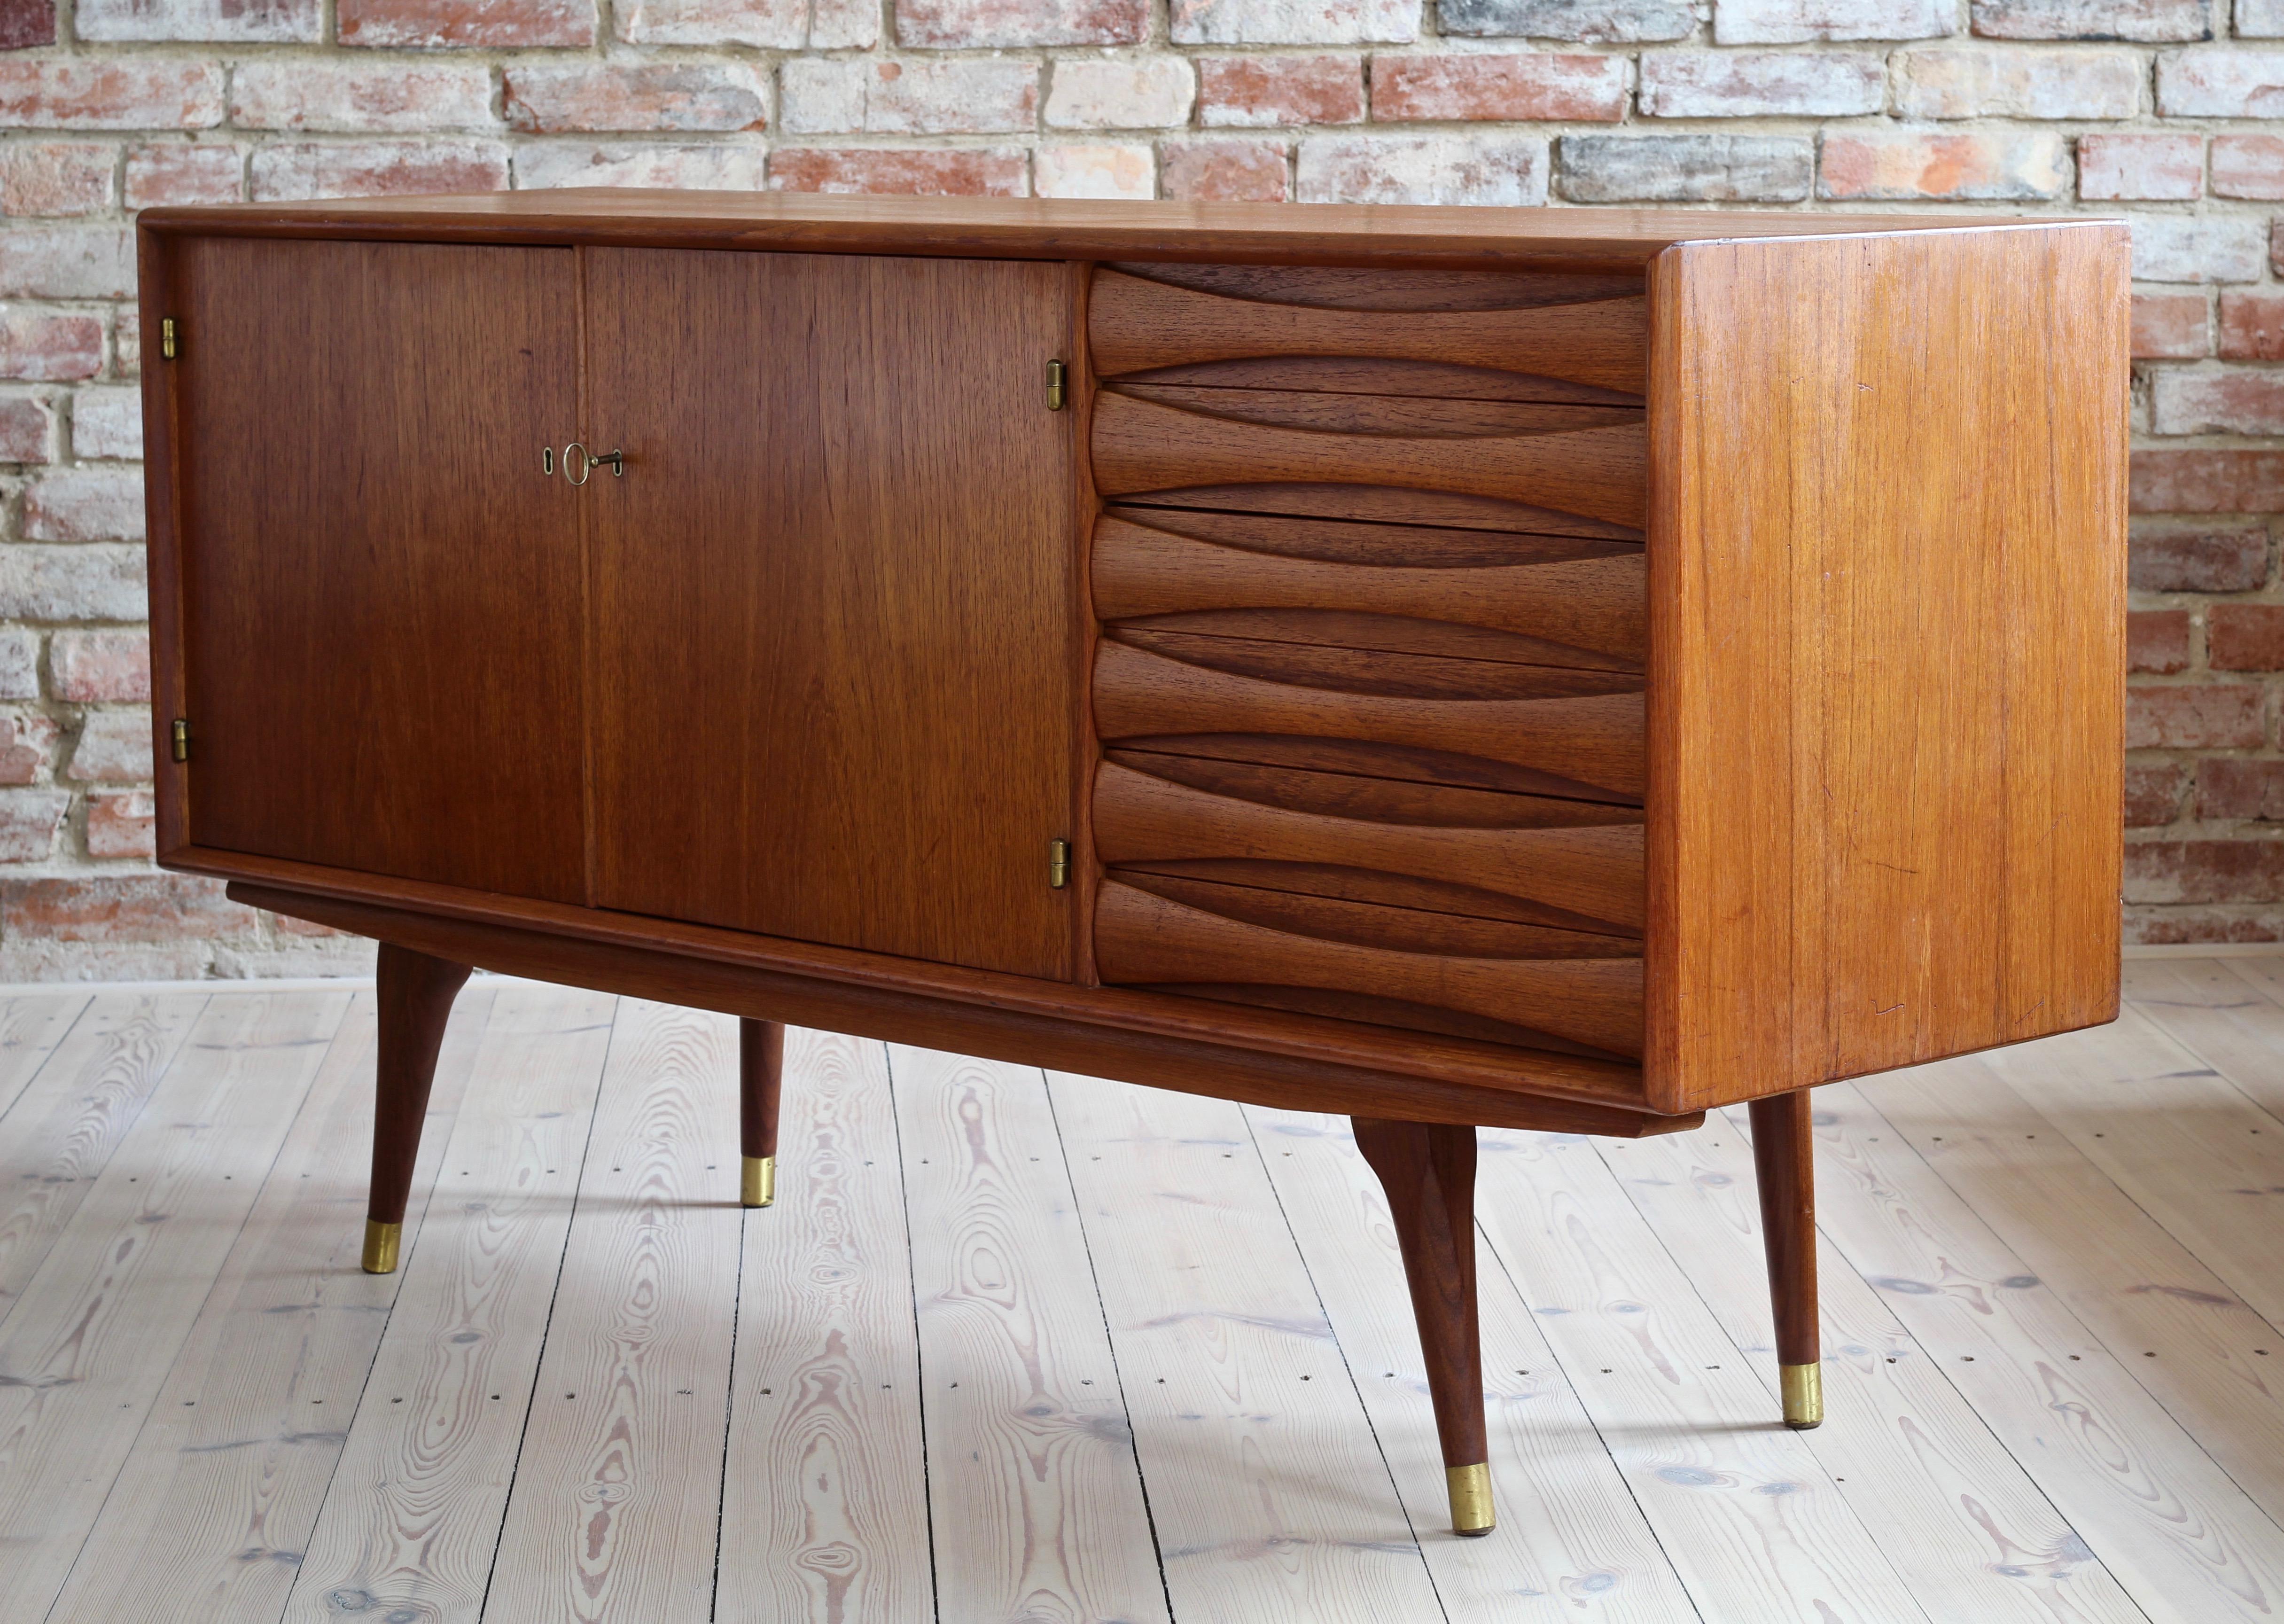 This is a quite rare Sven Andersen teak sideboard designed and manufactured in Norway around second half of 1950s. The piece features two doors that reveal lots of storage space and six drawers in the section on the right. The sideboard features